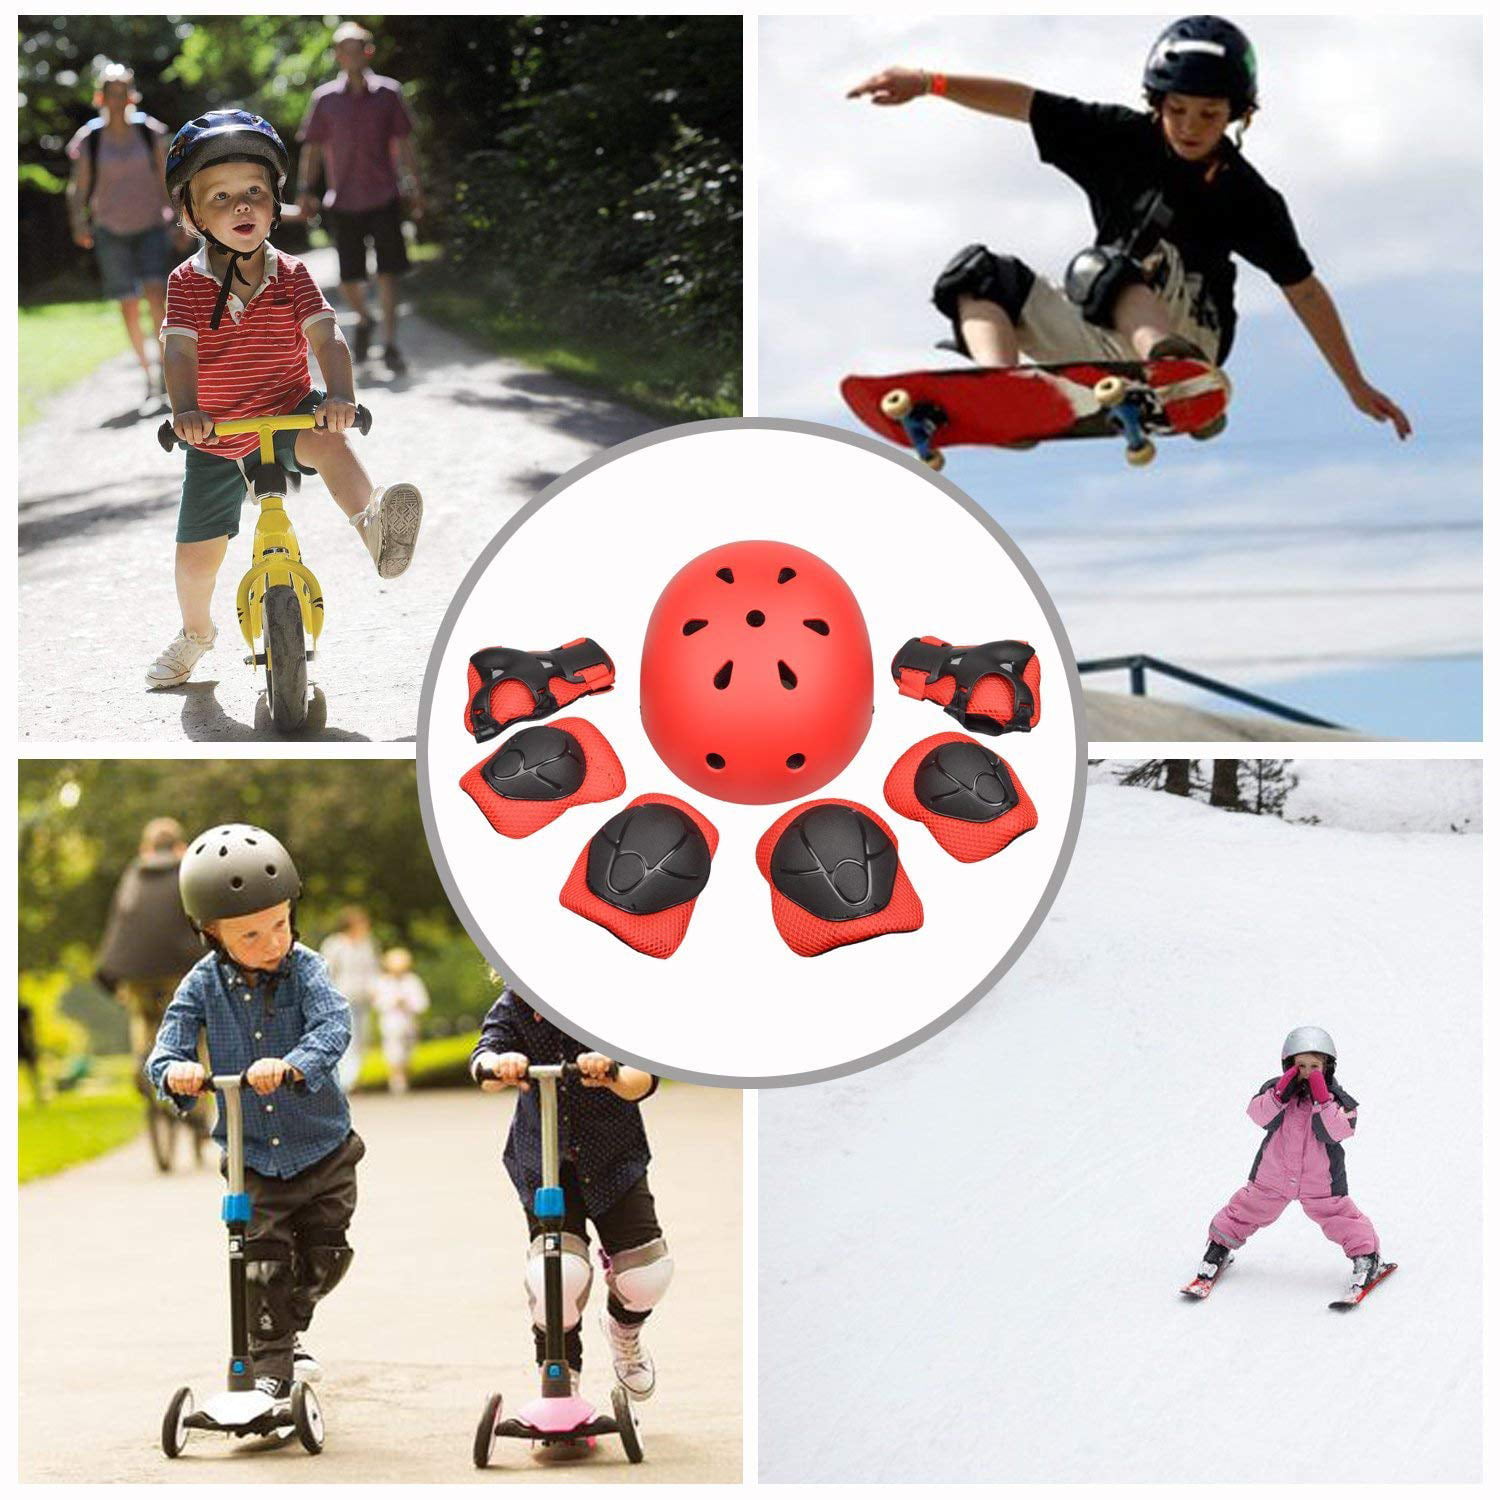 Adjustable Helmet with Knee Pads Elbow Pads Wrist Guards CPSC Certified for Skateboard SANSIRP Kids Protective Gear Set for Ages 3-8 Cycling Outdoor Sports Set Suitable Roller Skating Scooter 